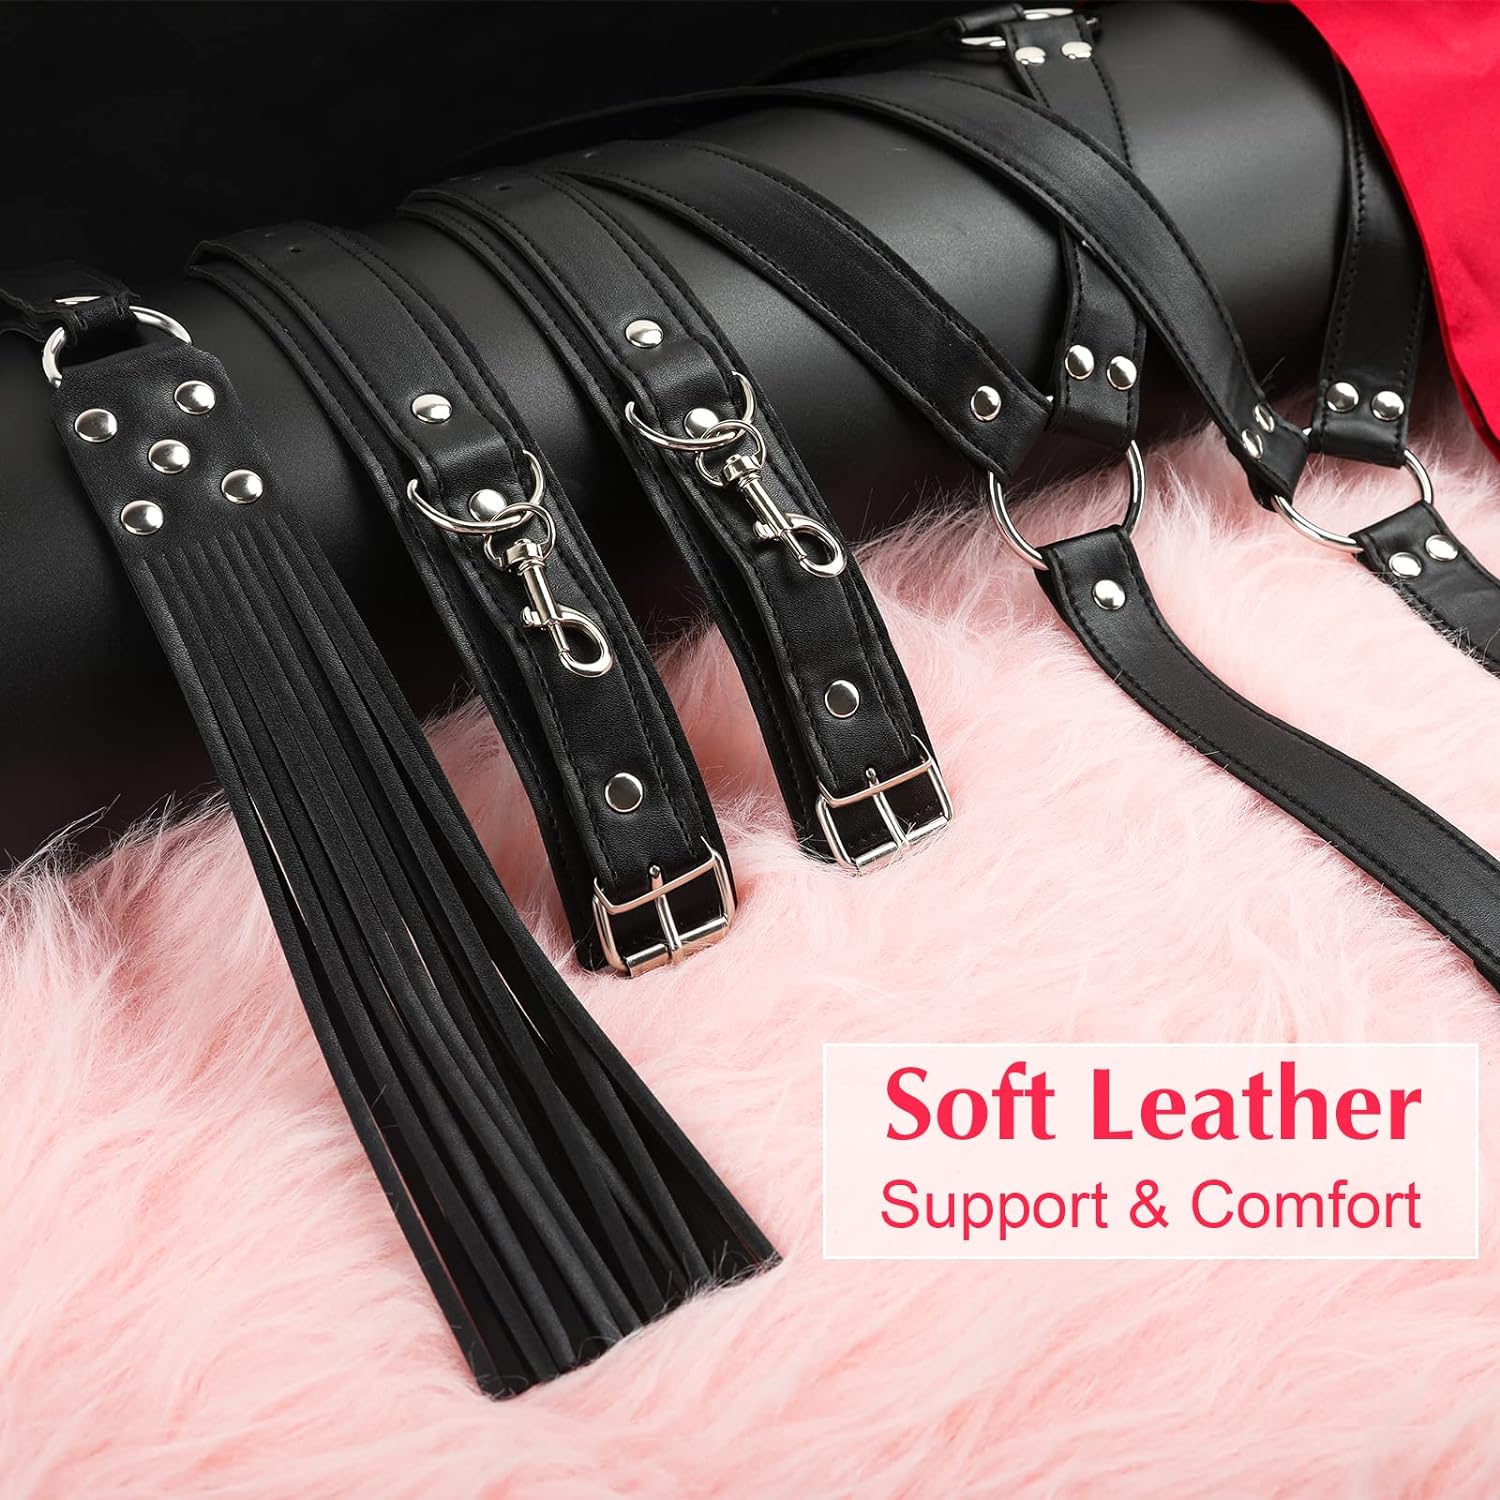 Sex Bondage BDSM Kit Restraints - Couple Sex toys with Neck to Wrist Behind Back Handcuffs Collar & Blindfold & Whip, Soft Leather Bondage Gear & Accessories, Adult Sex Straps SM Slave Gameplay Tools